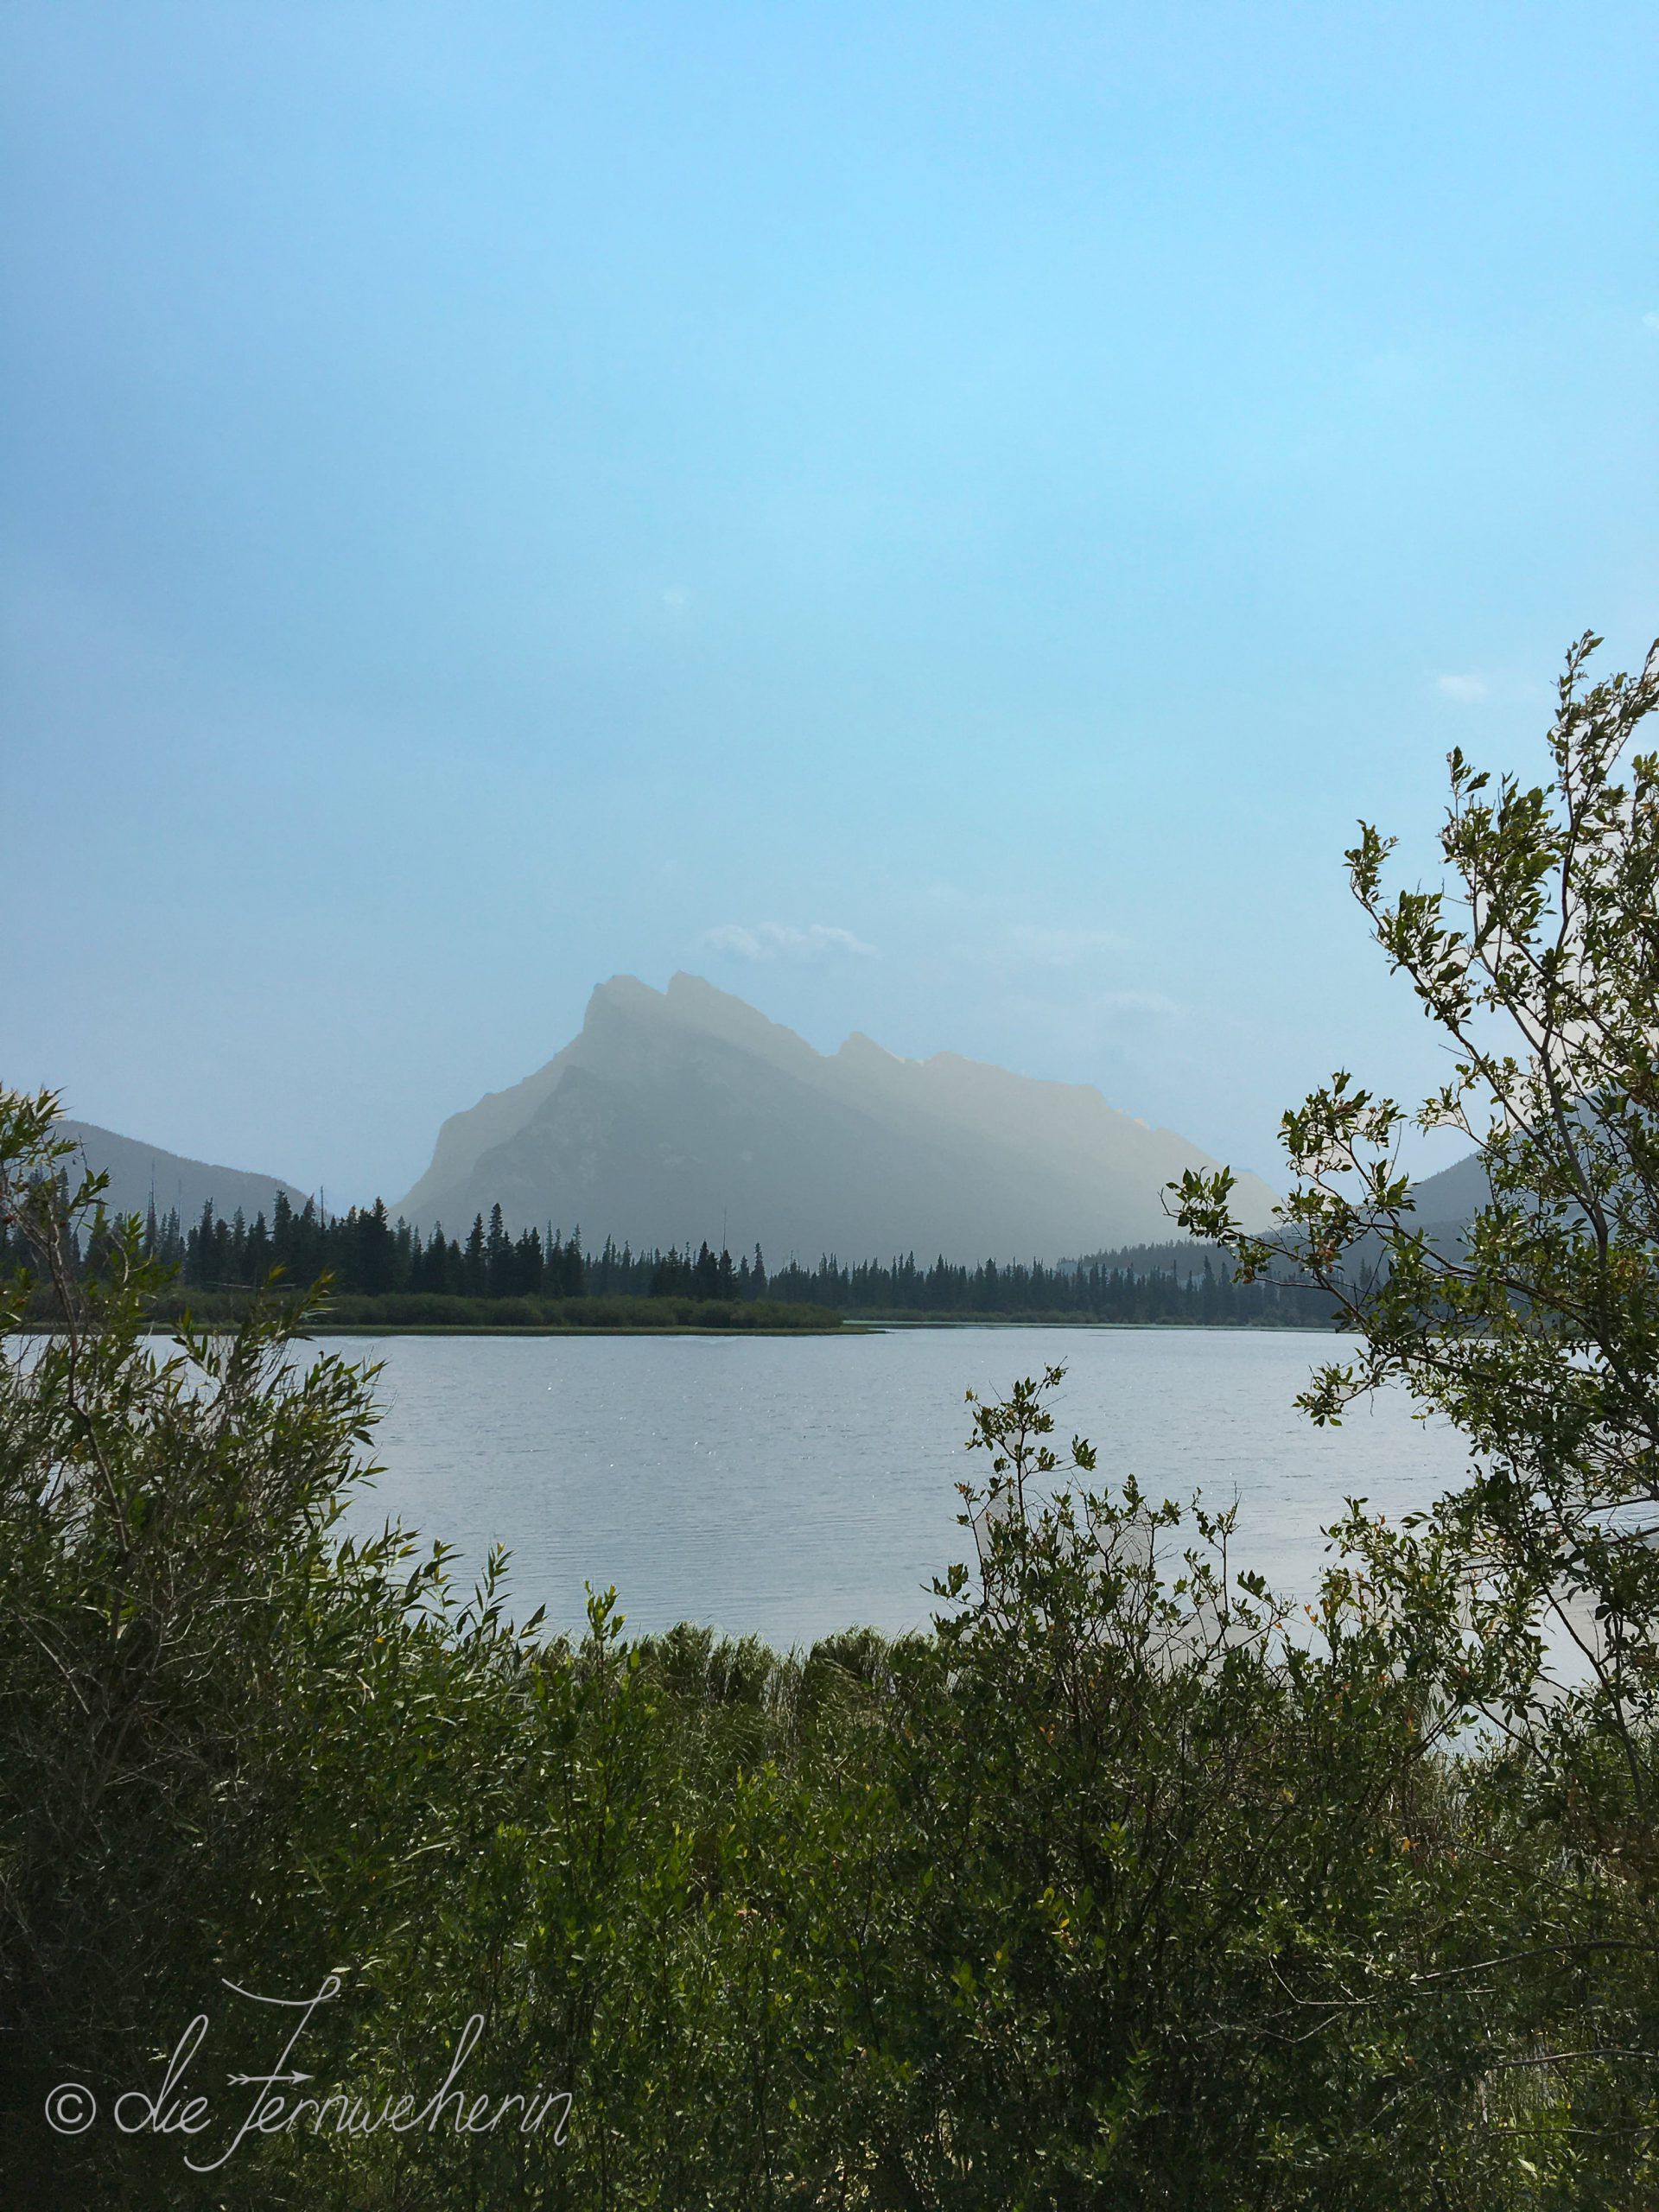 The view of Rundle Mountain from Vermillion Lakes in Banff National Park.